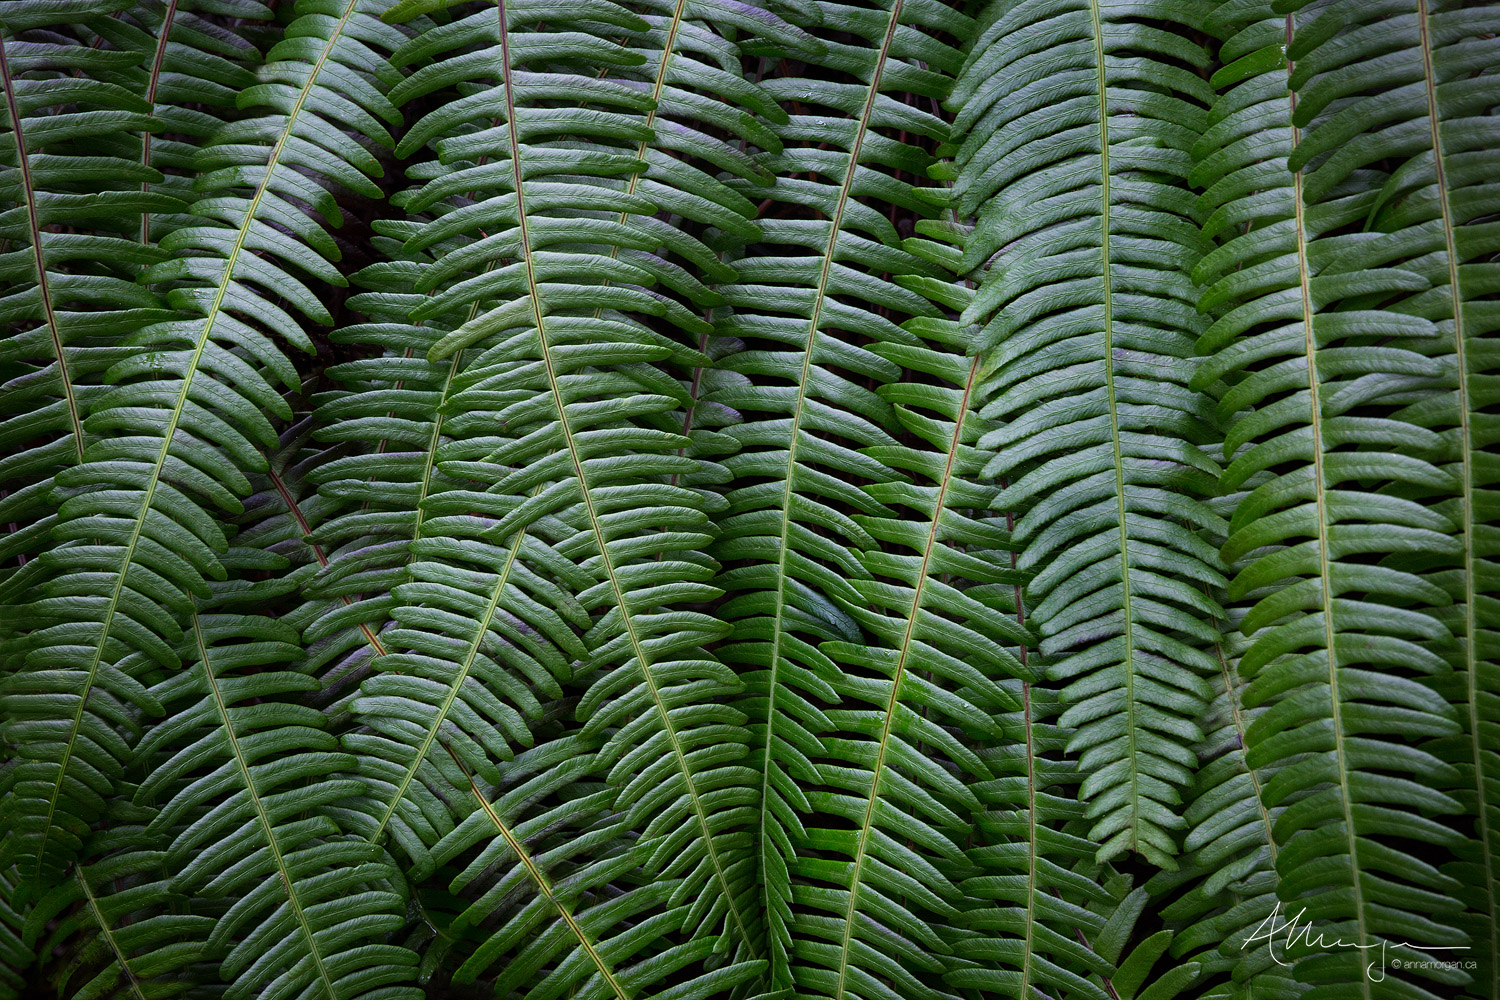 Layered fronds of liquorice fronds grow in a natural wall in the rainforest